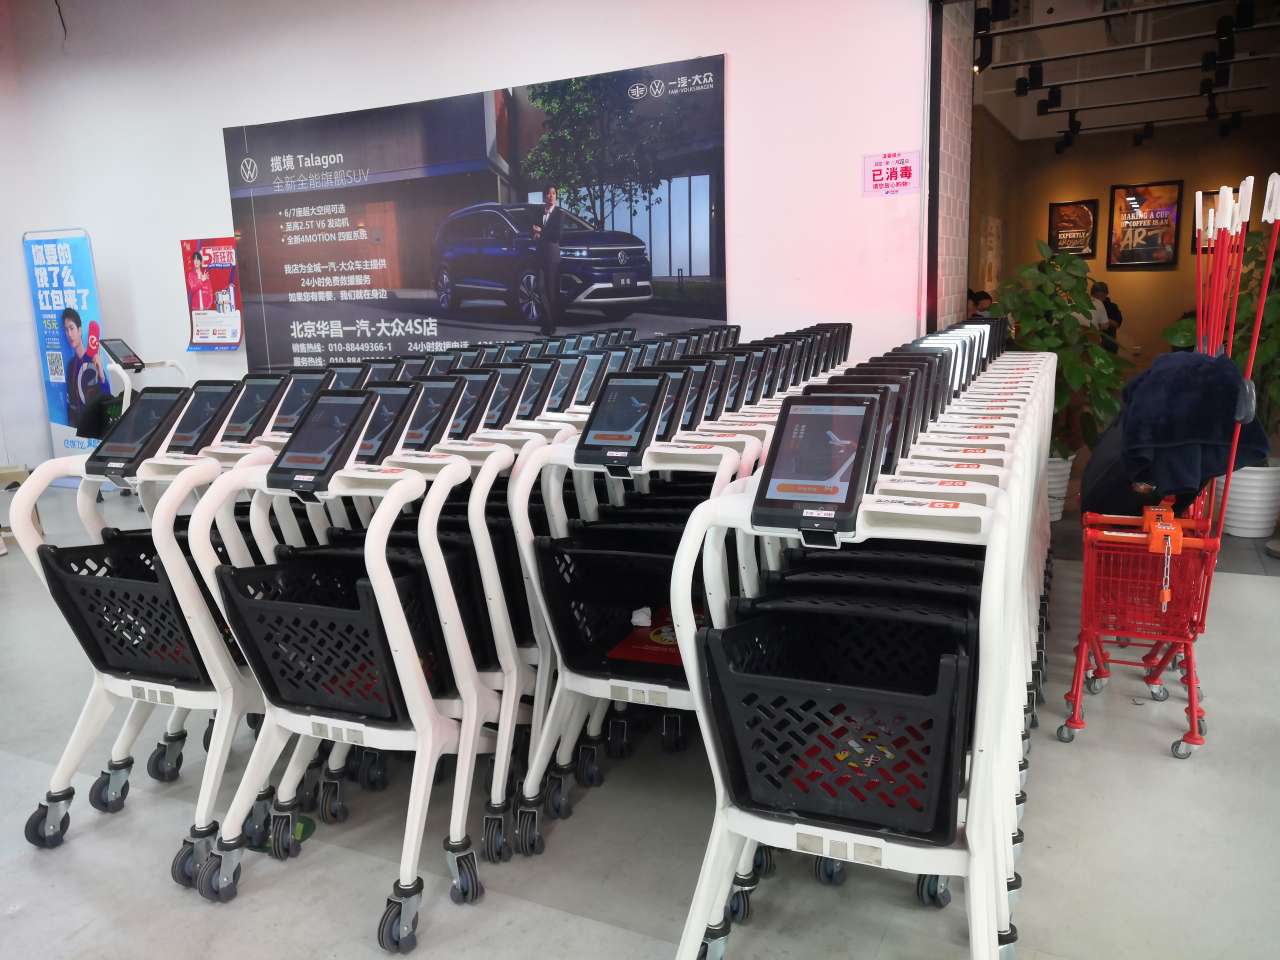 smart shopping cart with automatic billing system